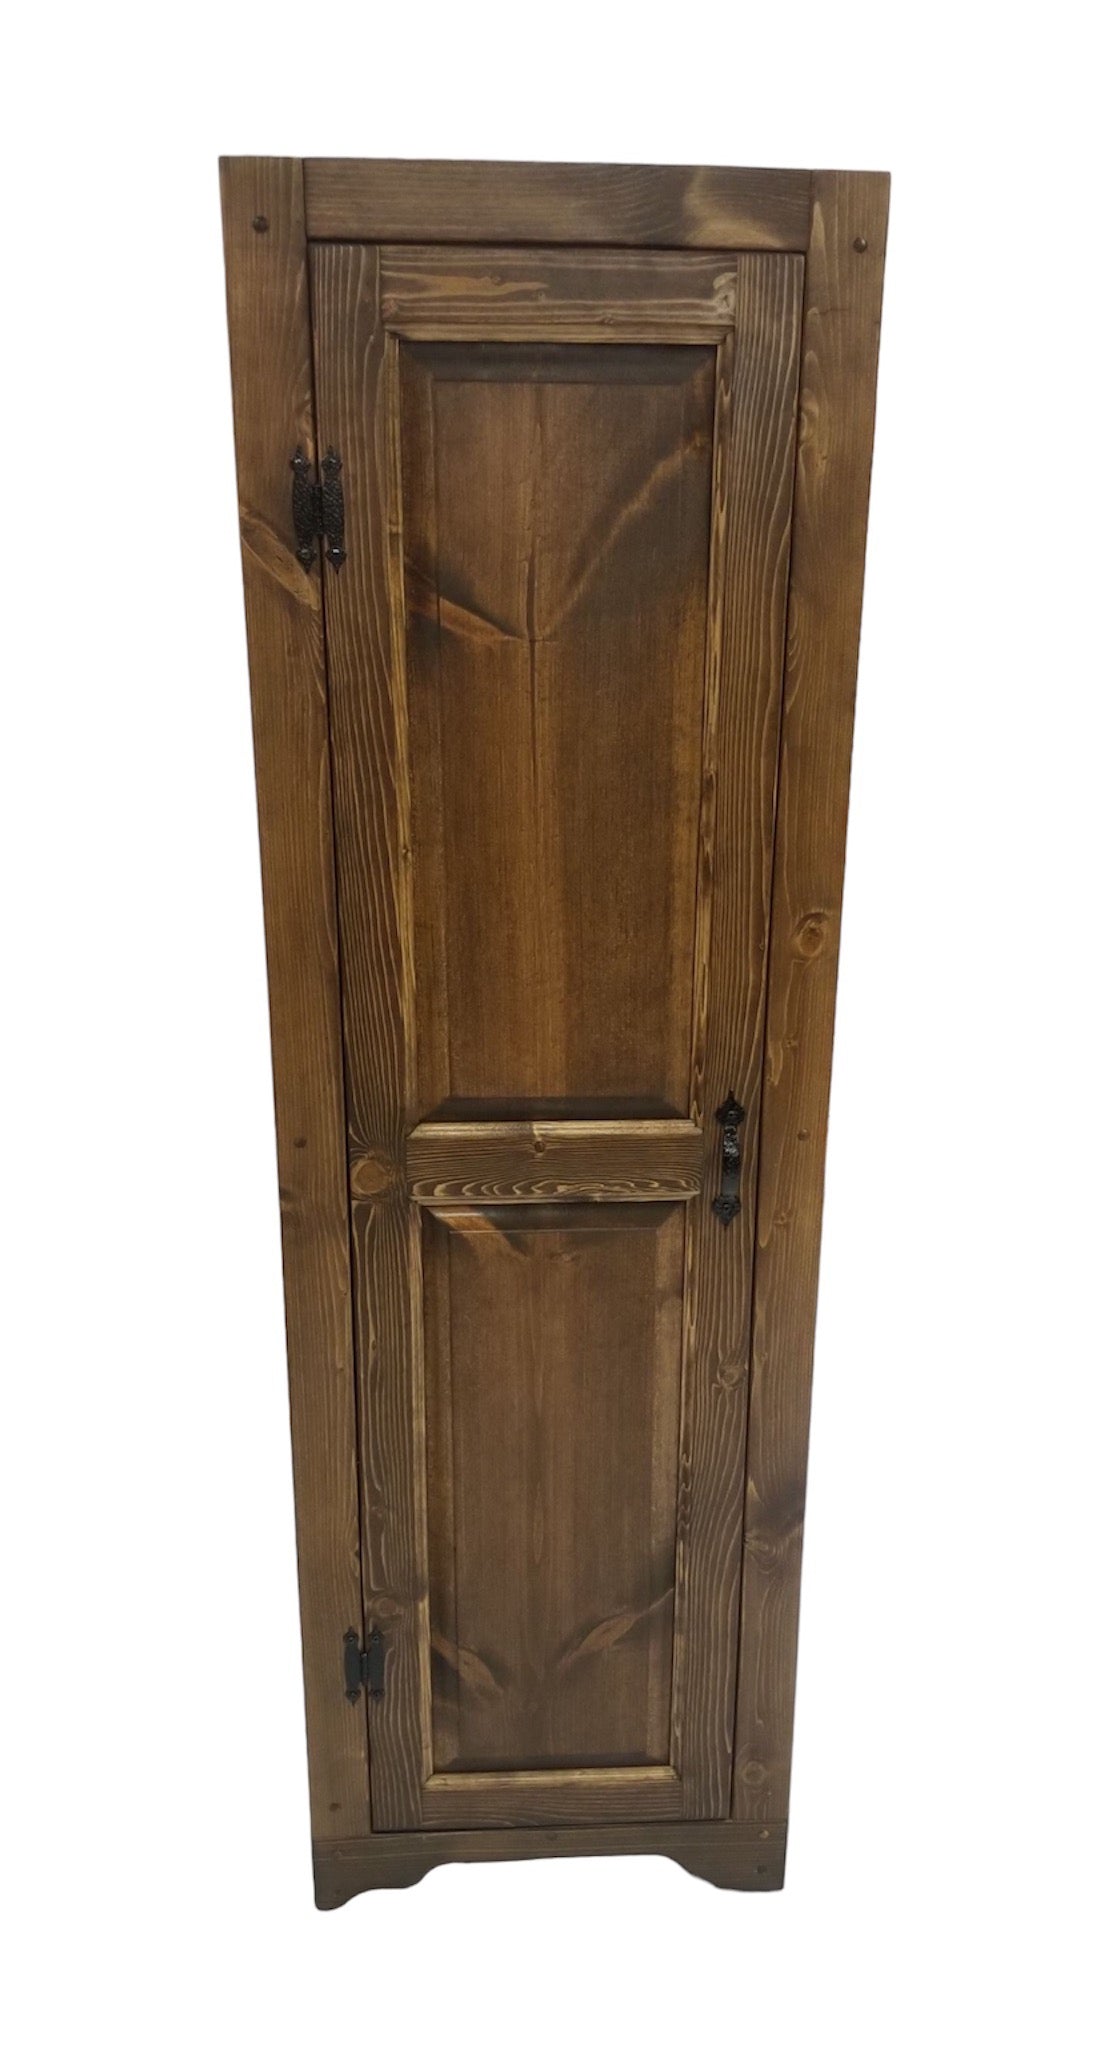 (CUSTOM SIZE) Tall Pine Pantry Cabinet, Two Piece Wood Pantry